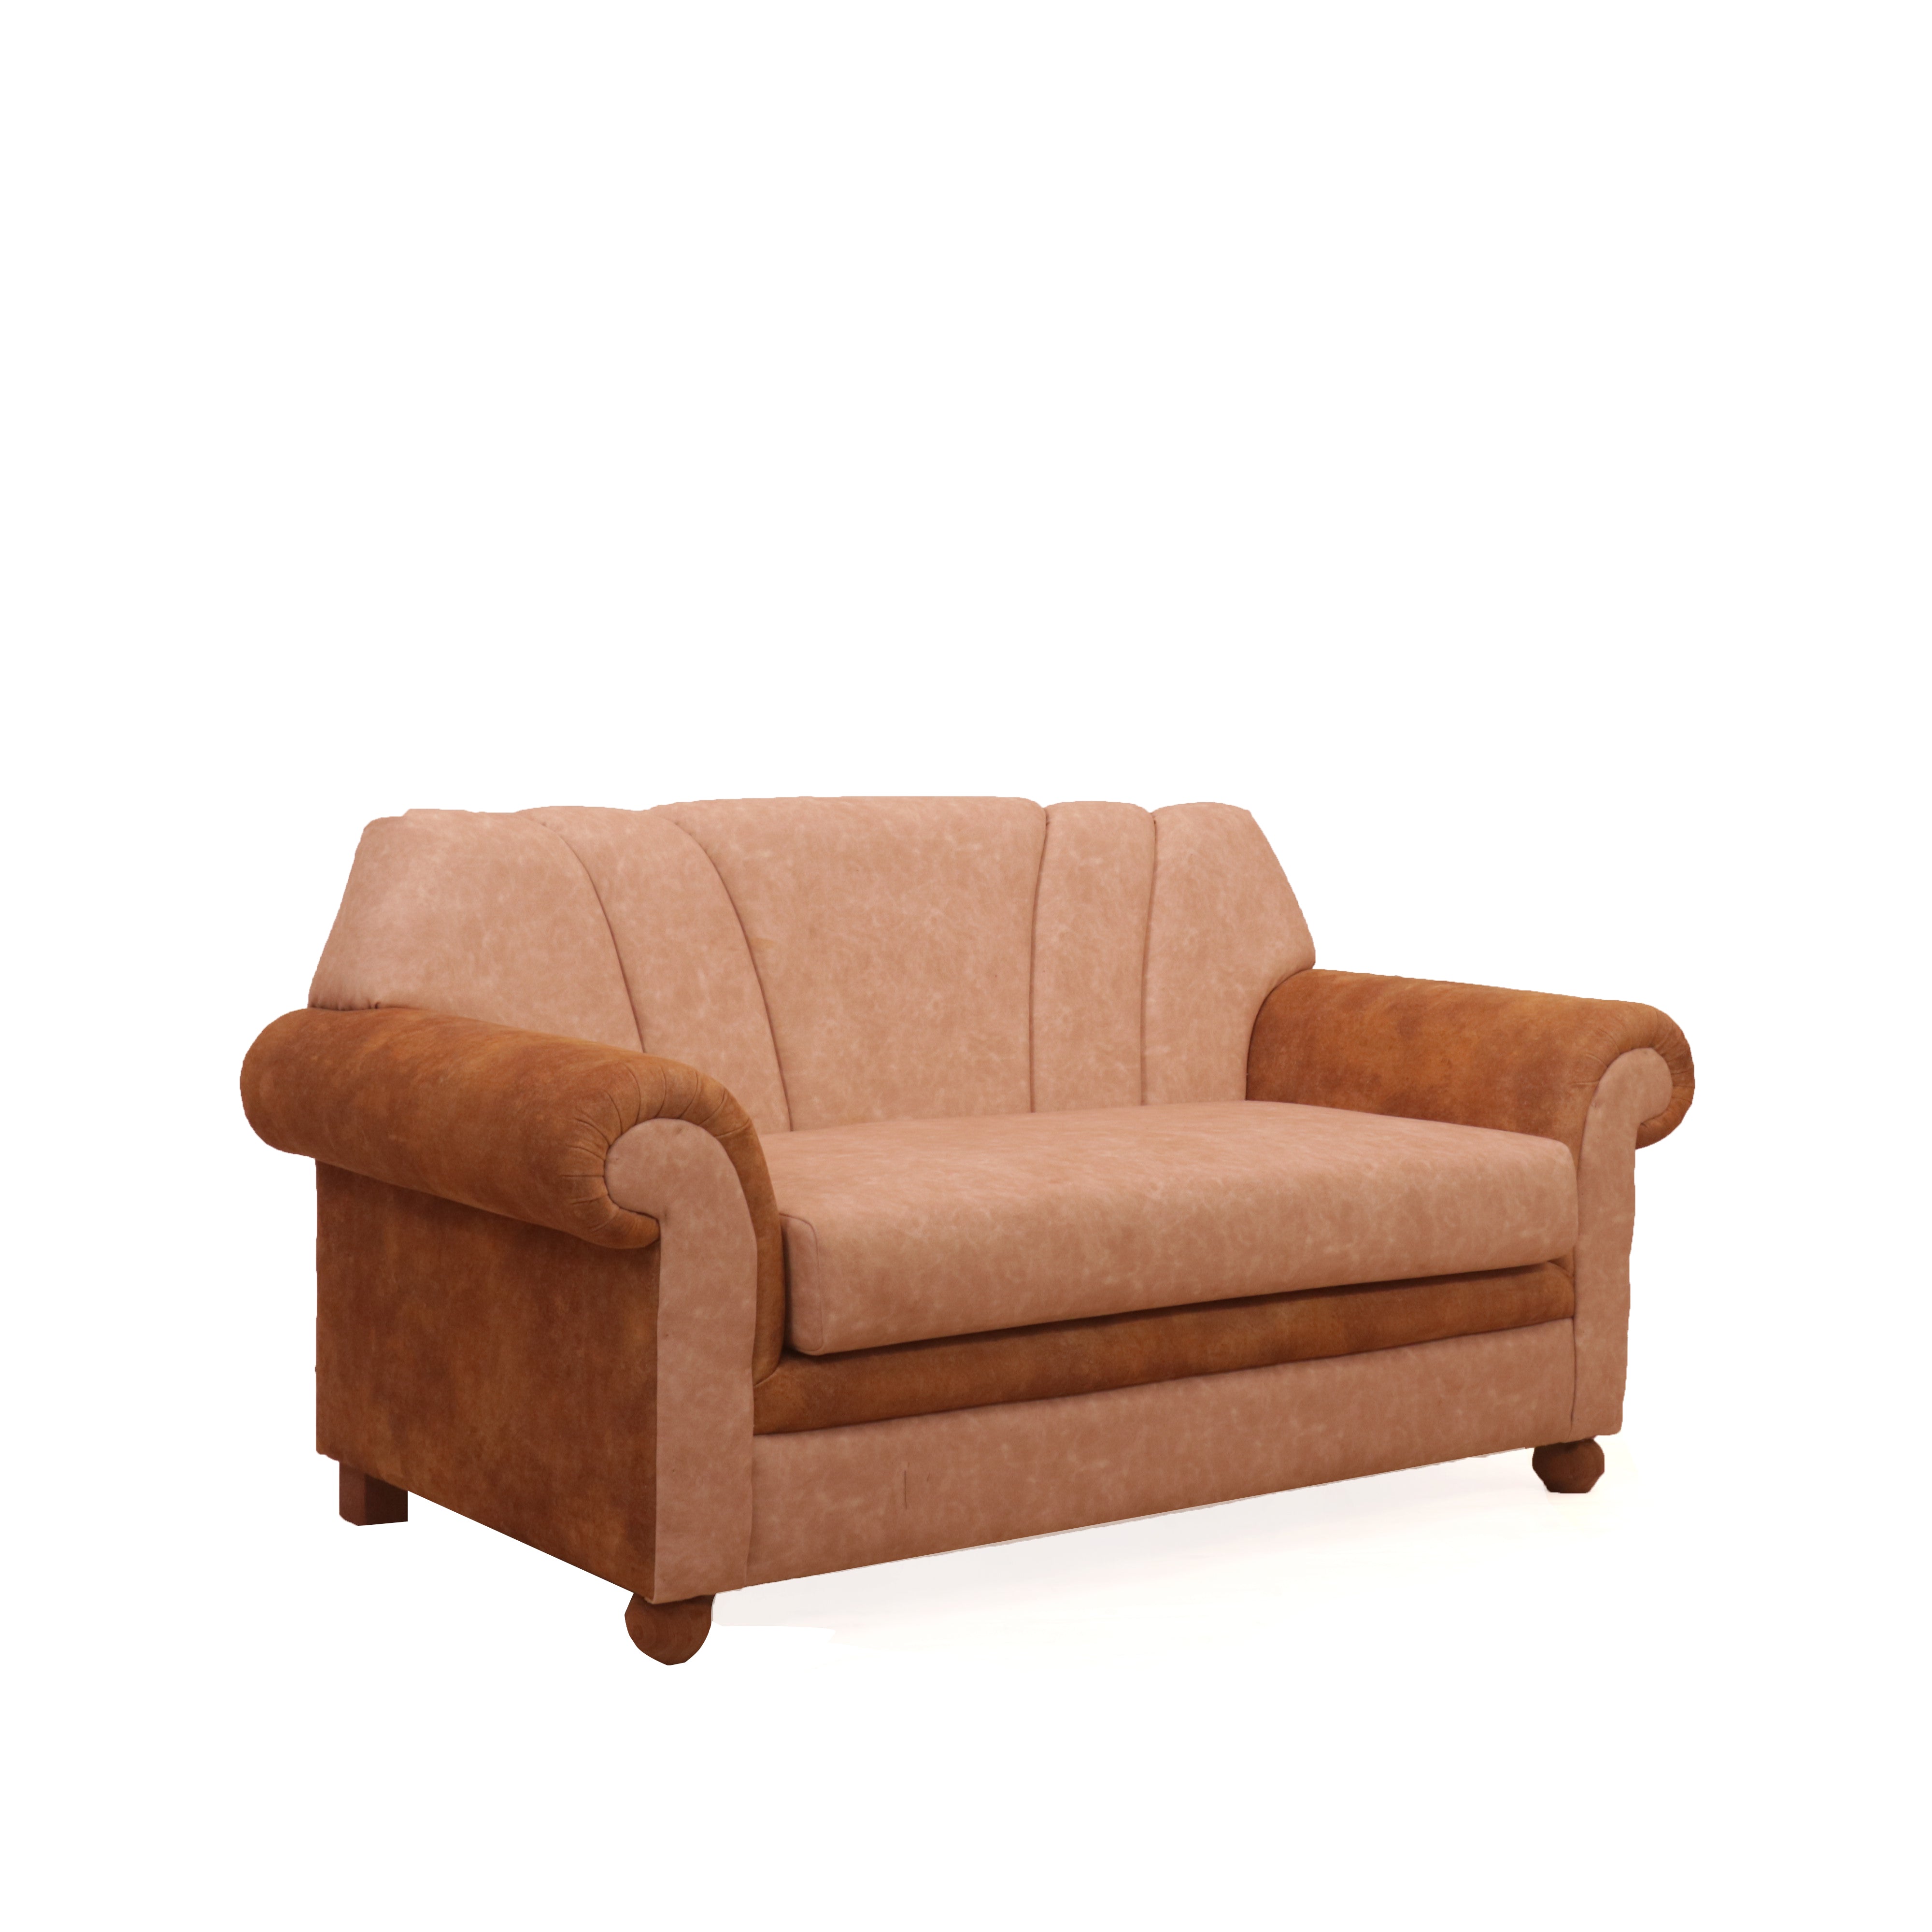 Layered Upholstered Beige Couch Sofa